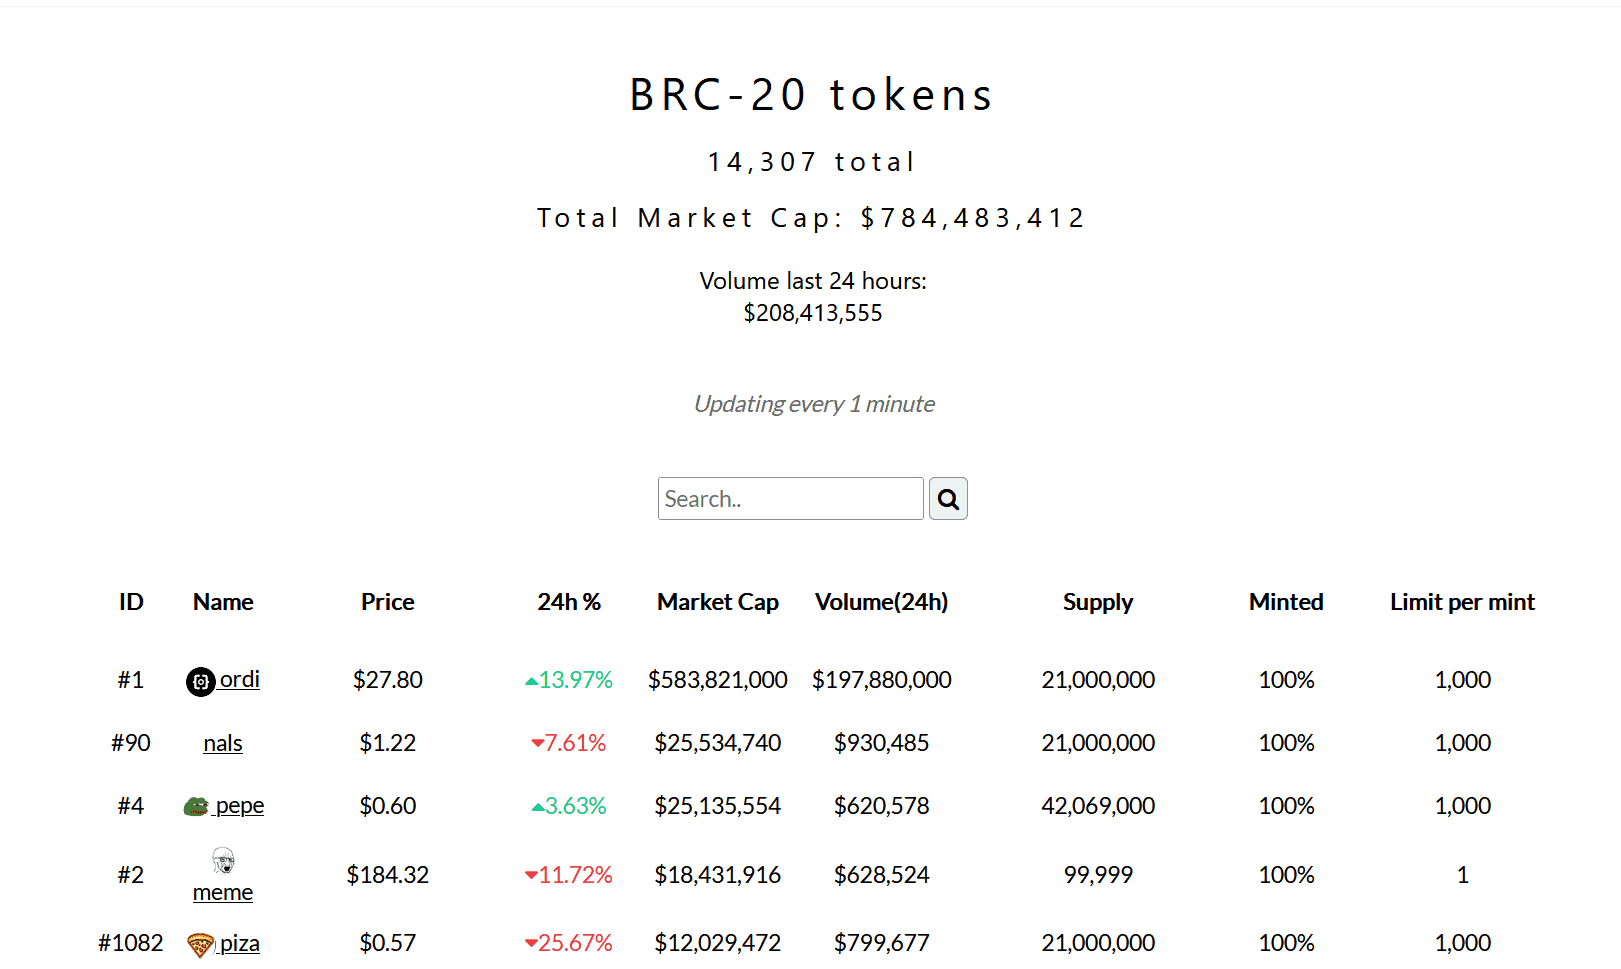 Market capitalization of the largest BRC-20 tokens I Source: Brc-20.io